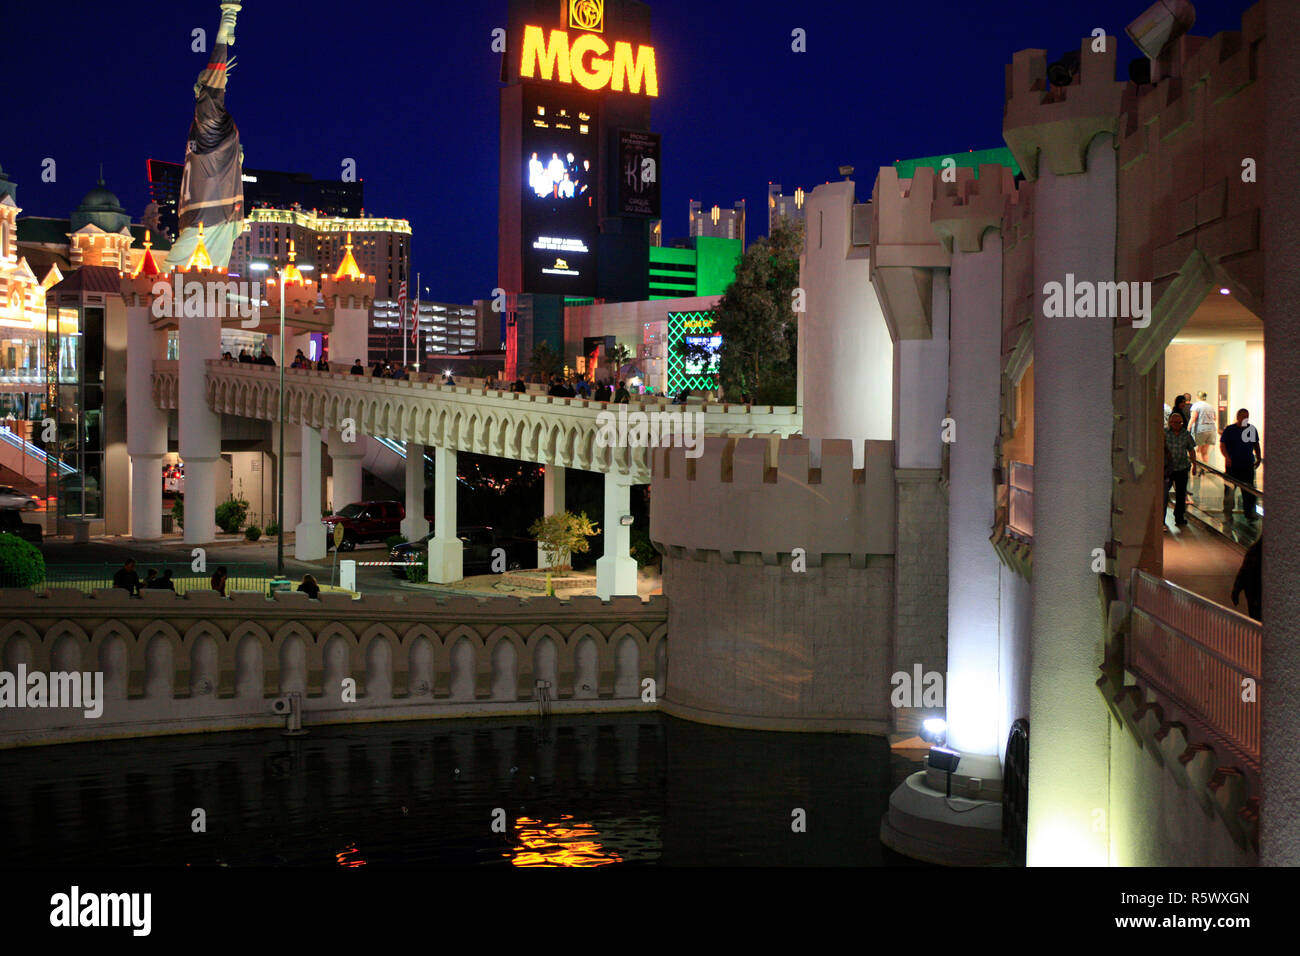 MGM Grand hotel and New York New York from the Excalibur hotel at night in Las Vegas, Nevada Stock Photo